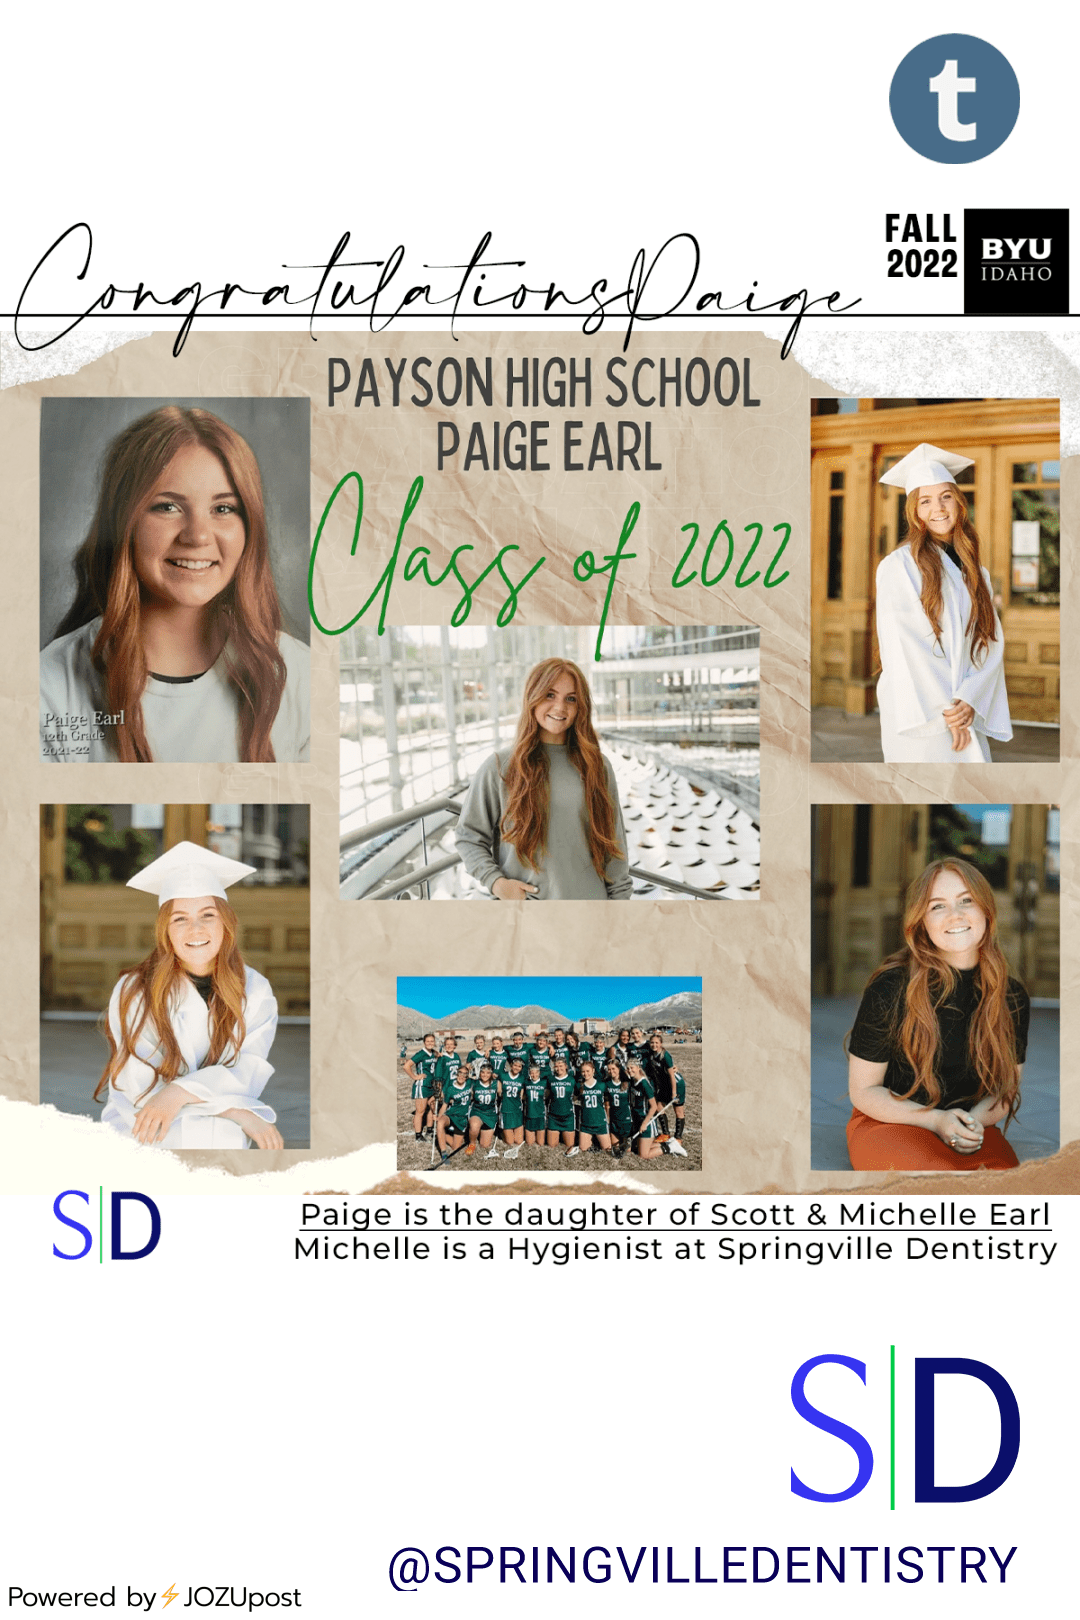 Paige Earl! is graduating from Payson high school this upcoming week. She is Michelle (hygienist) and Scott Earl’s daughter. Paige is planning on going to BYU-I in the fall.
CONGRATULATIONS Paige!
We are so excited for you! We wish you all the best!...